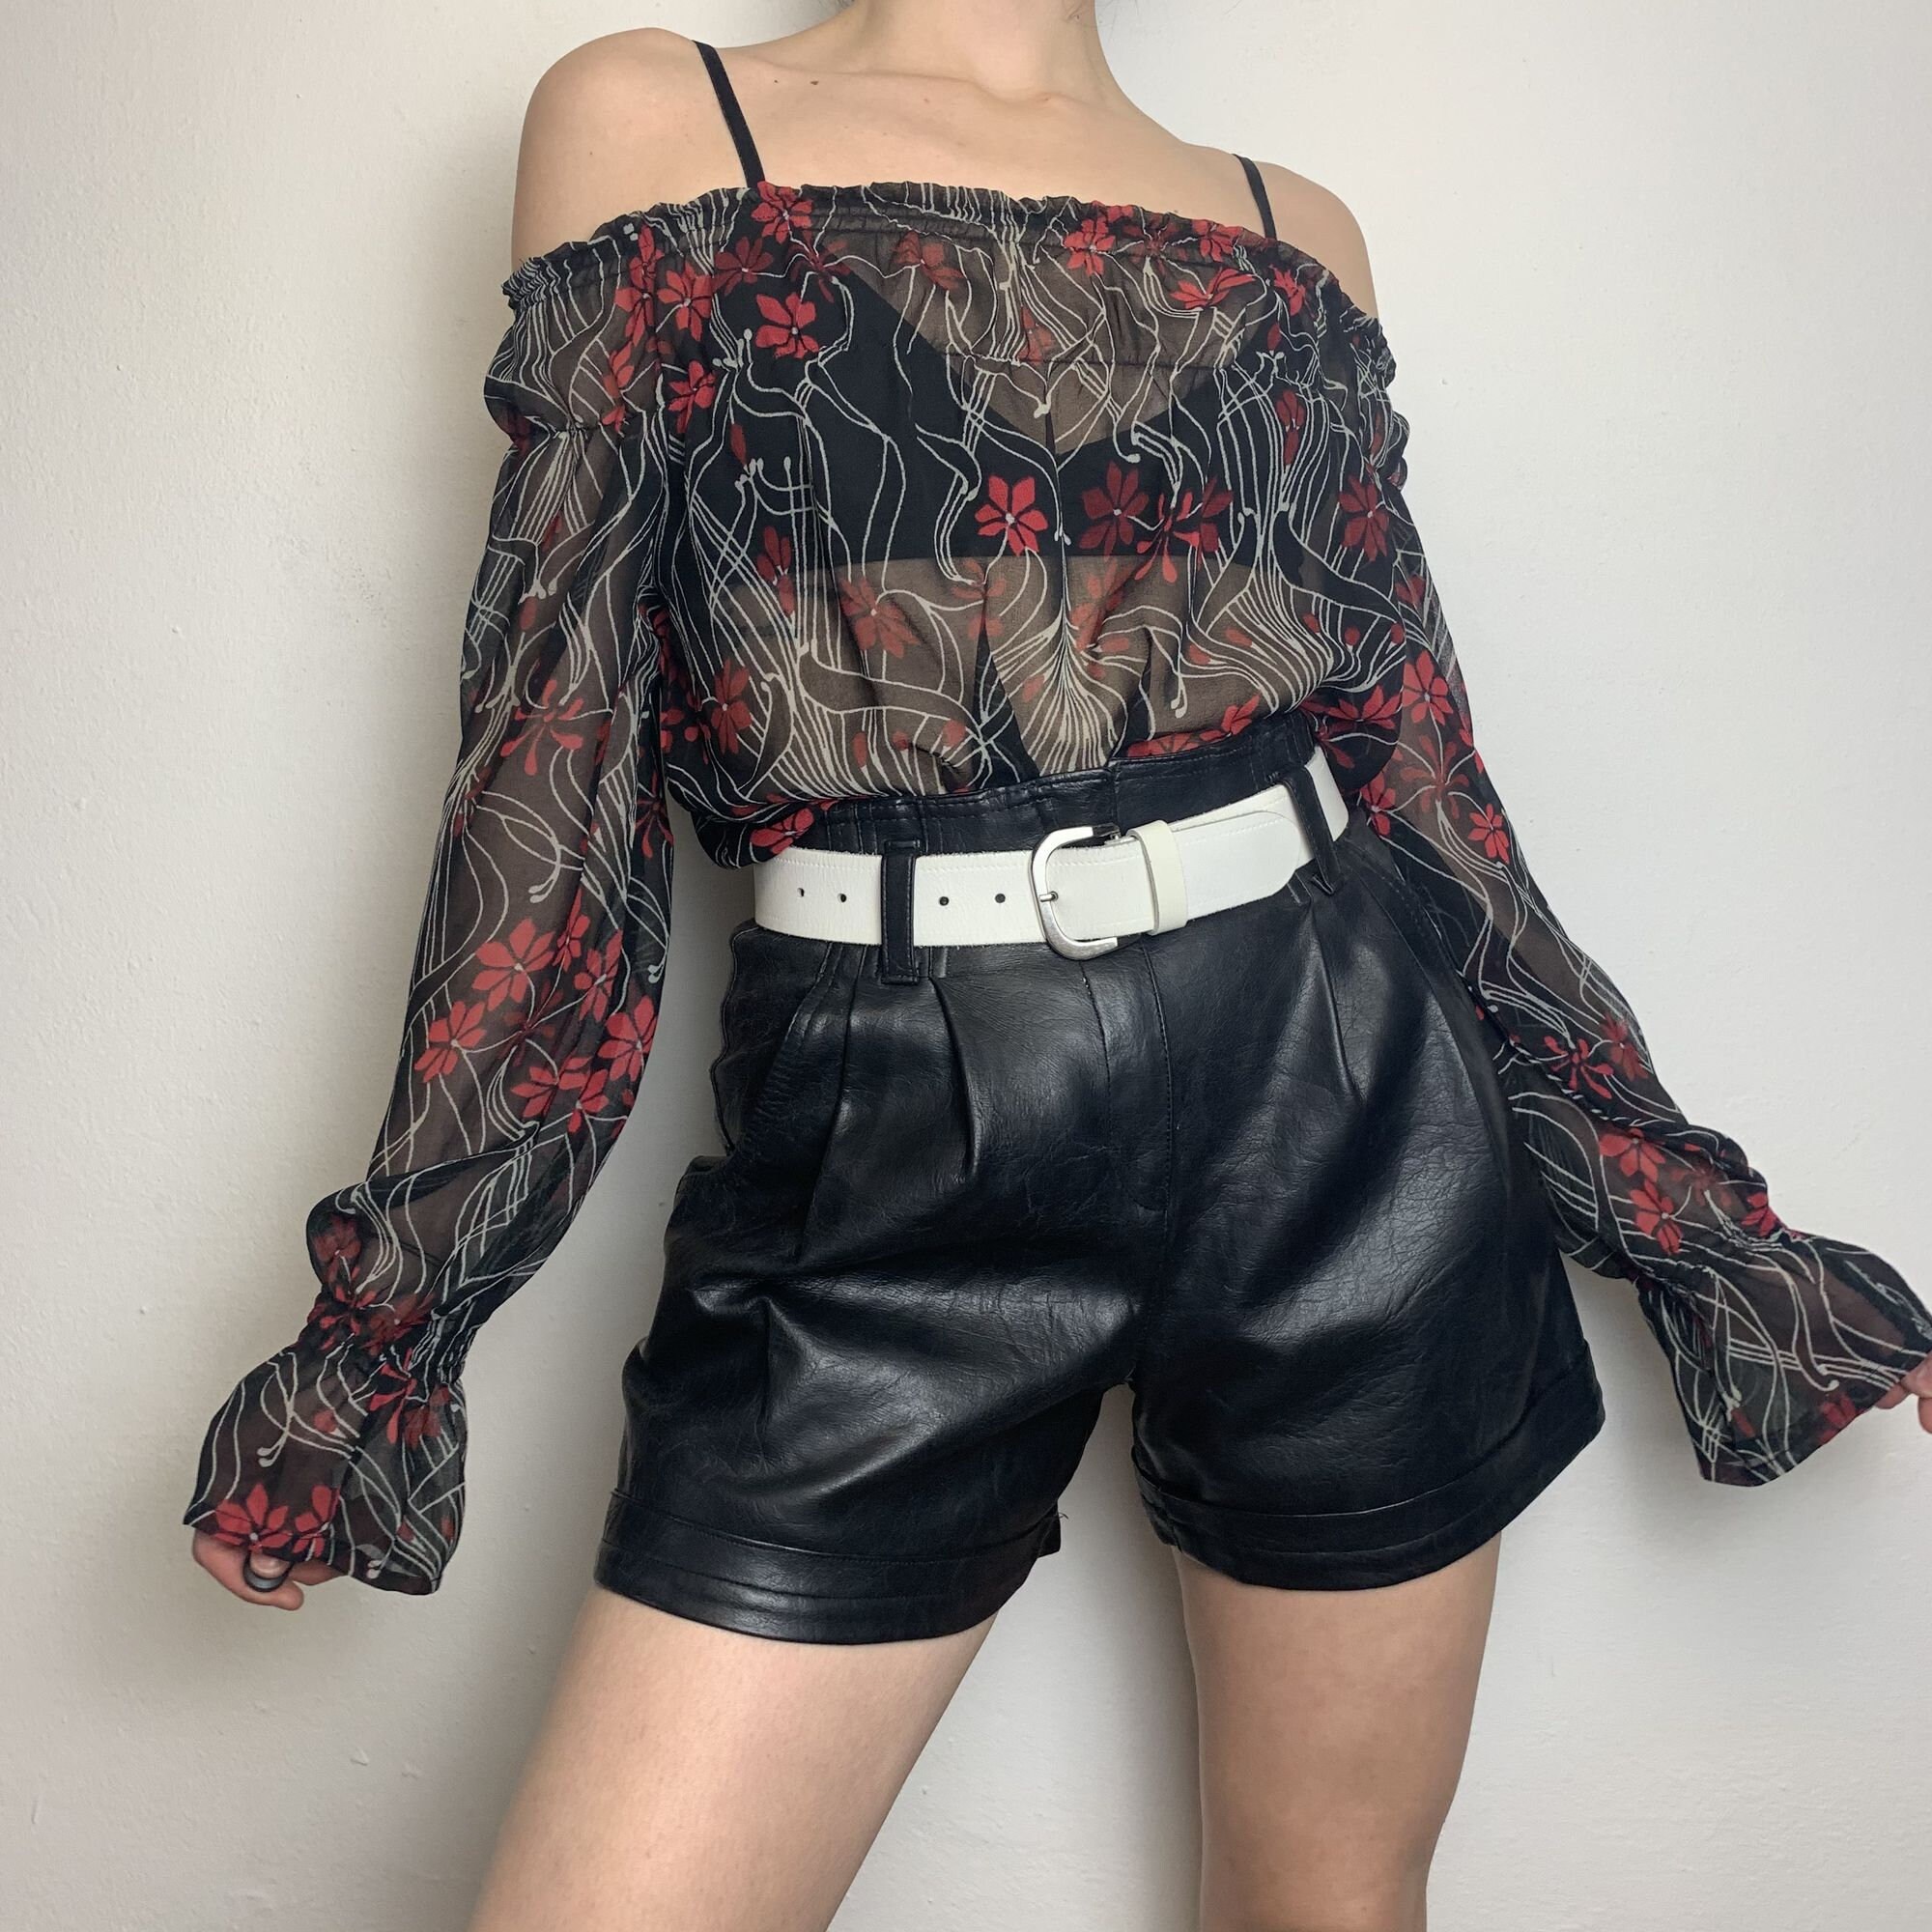 Kant Top Party Top Sheer Top Kleding Dameskleding Tops & T-shirts Blouses See Through Blouse 